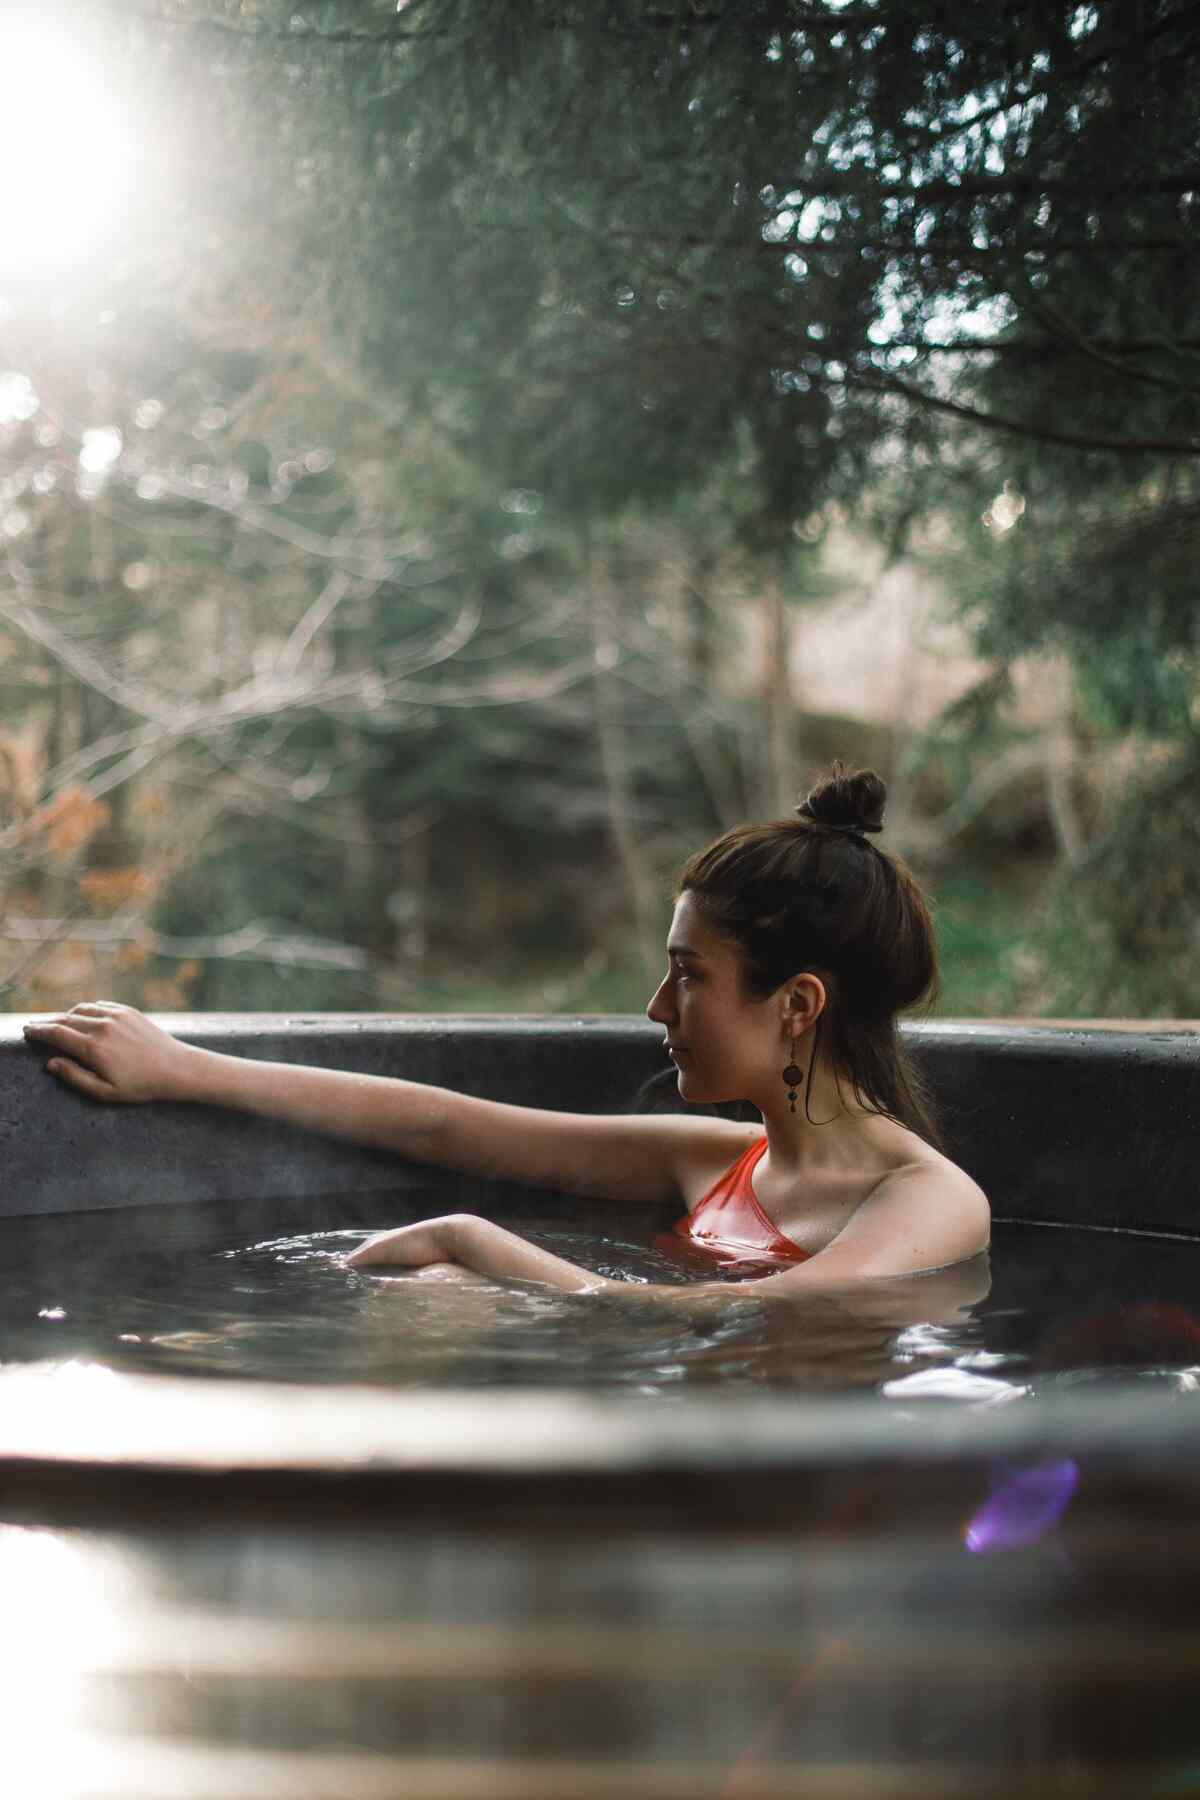 FAQ’s on both hot tubs and home sauna’s